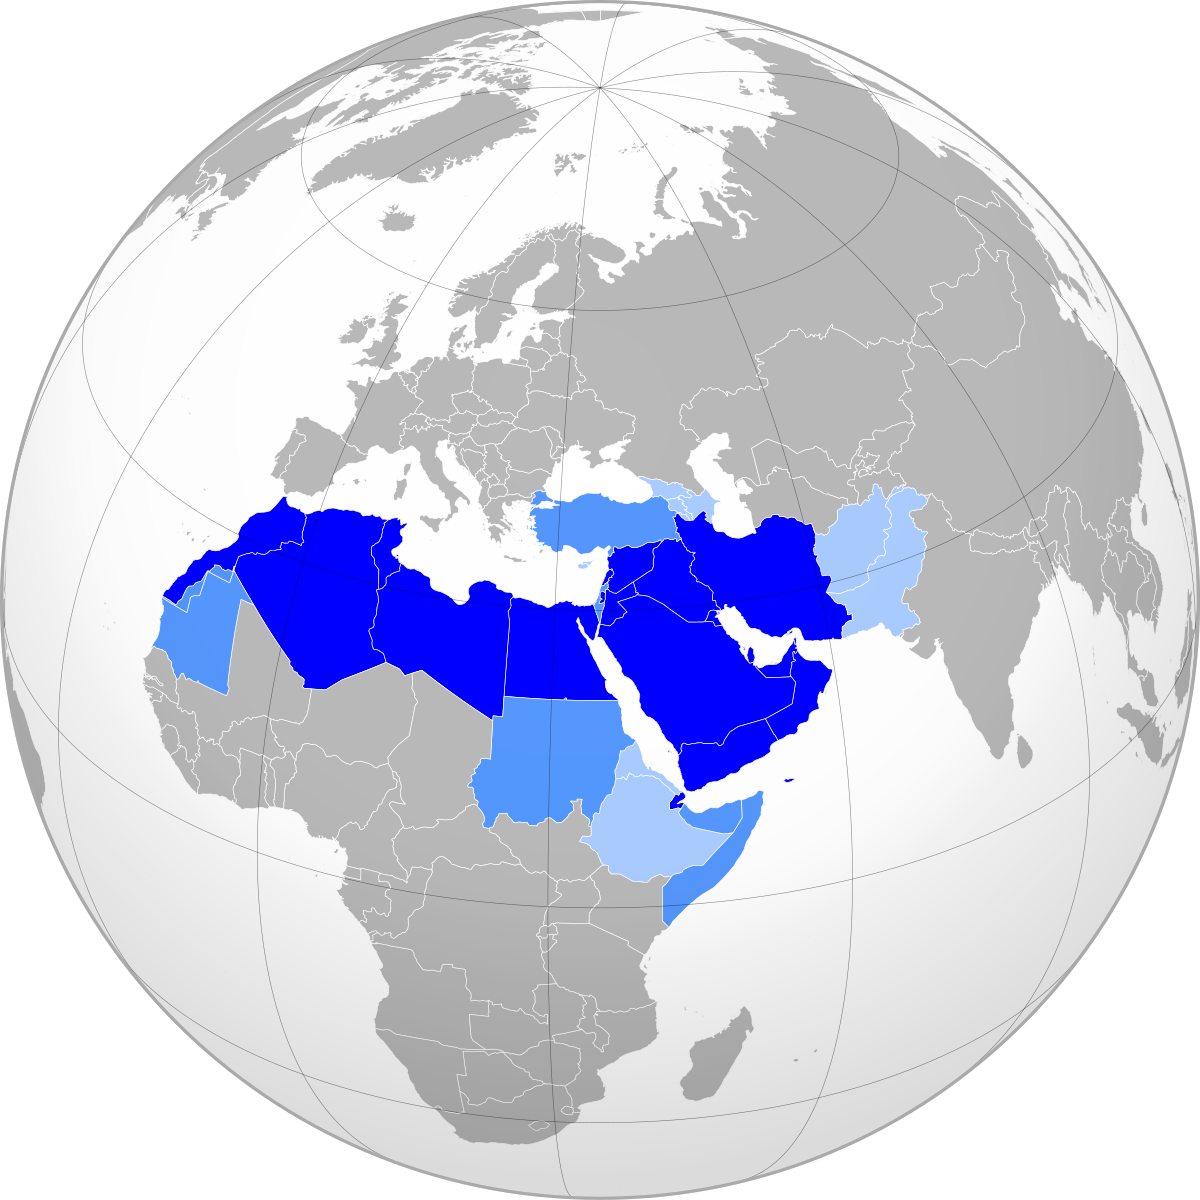 1200px-MENA_or_WANA_according_to_various_definitions.svg.png